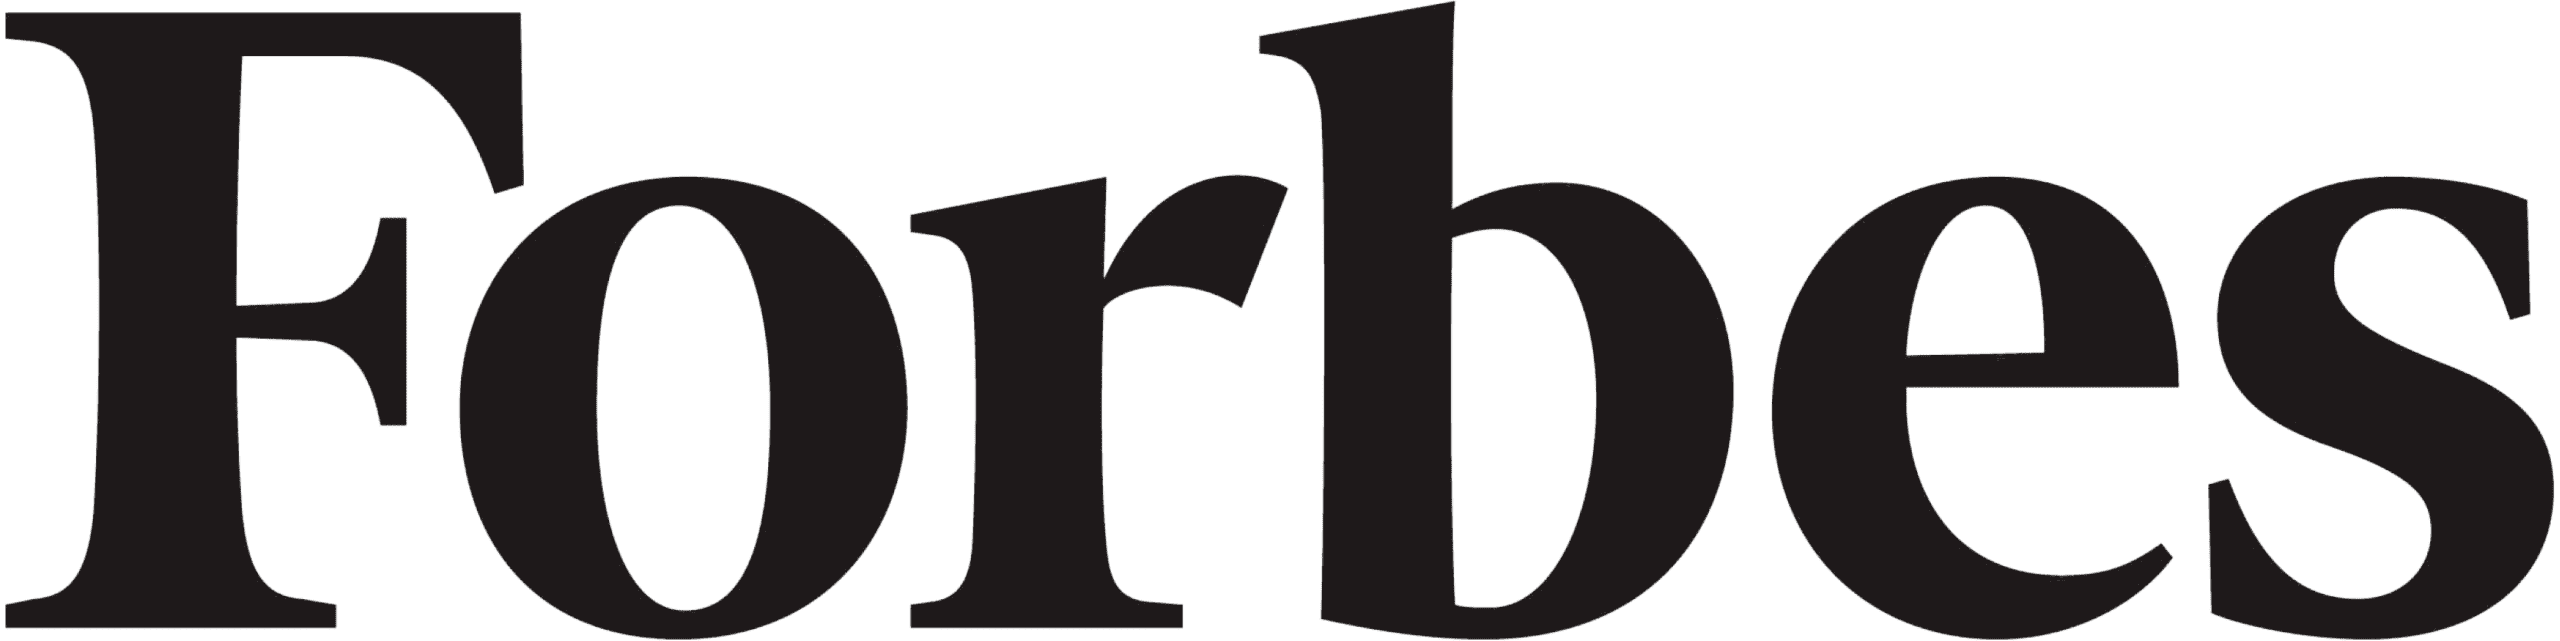 logo of forbes